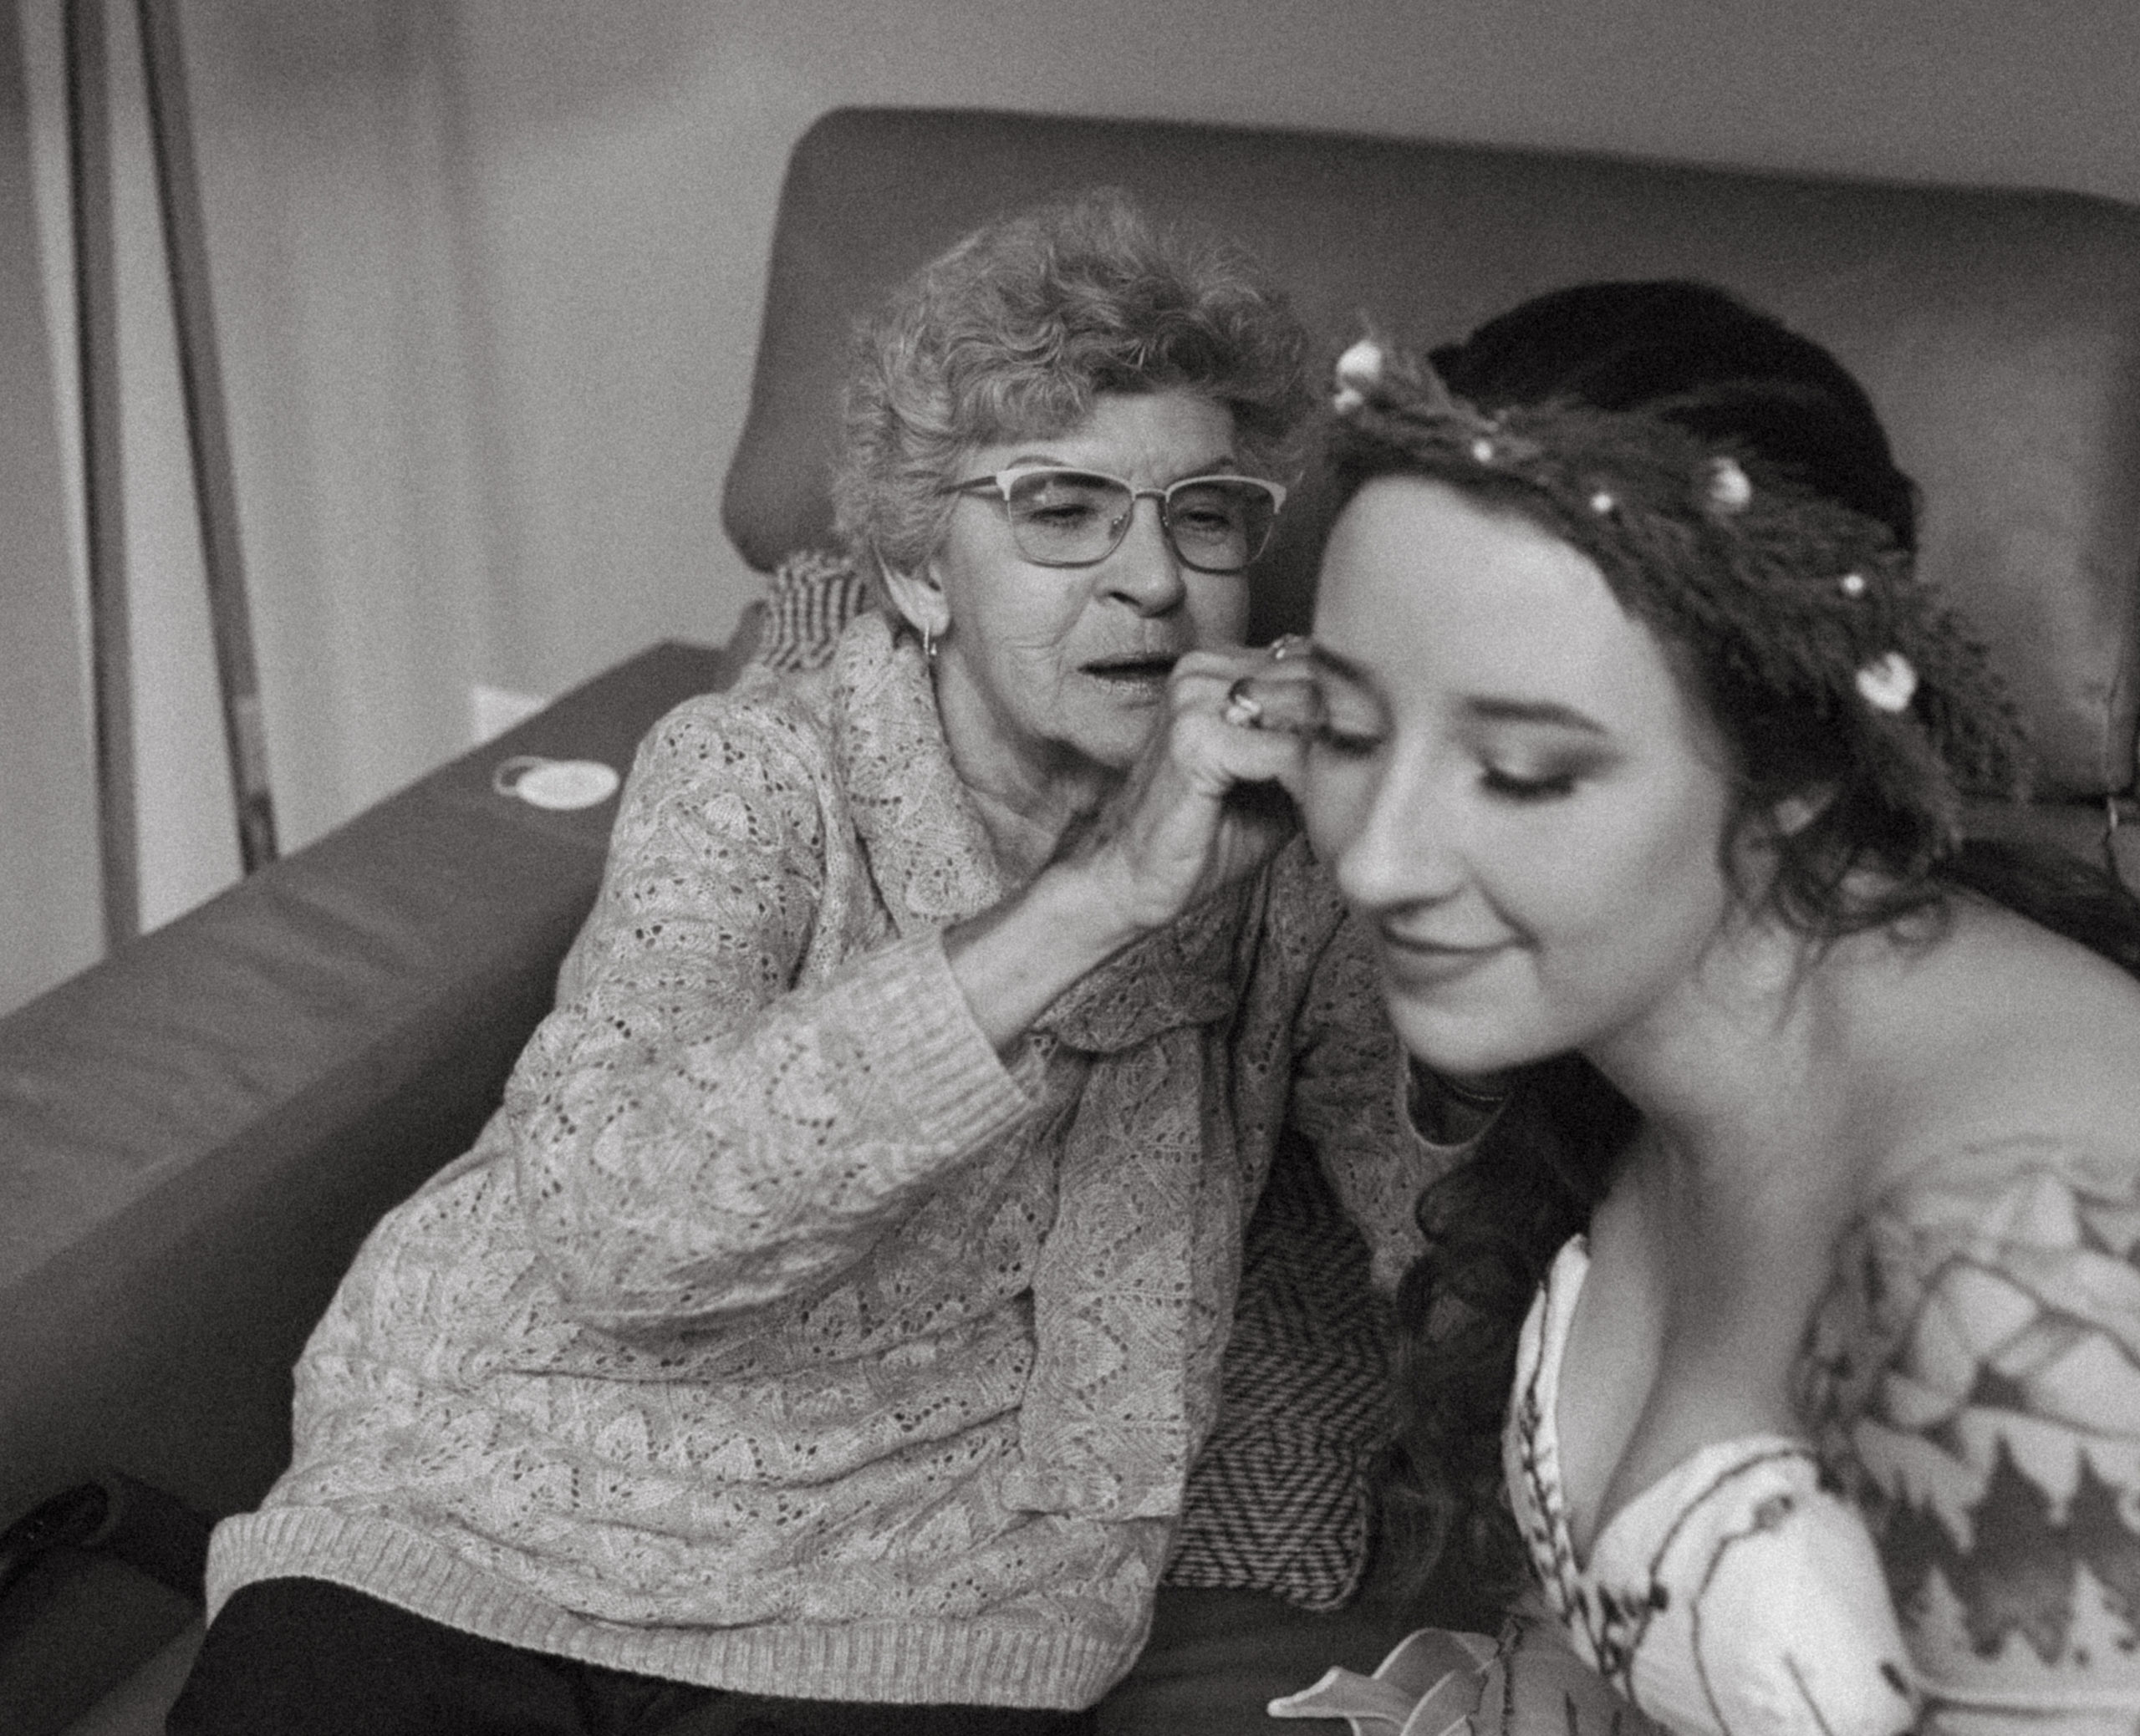 The bride's grandmother helps her put on her earrings for her wedding ceremony in the blue ridge mountains of North Carolina